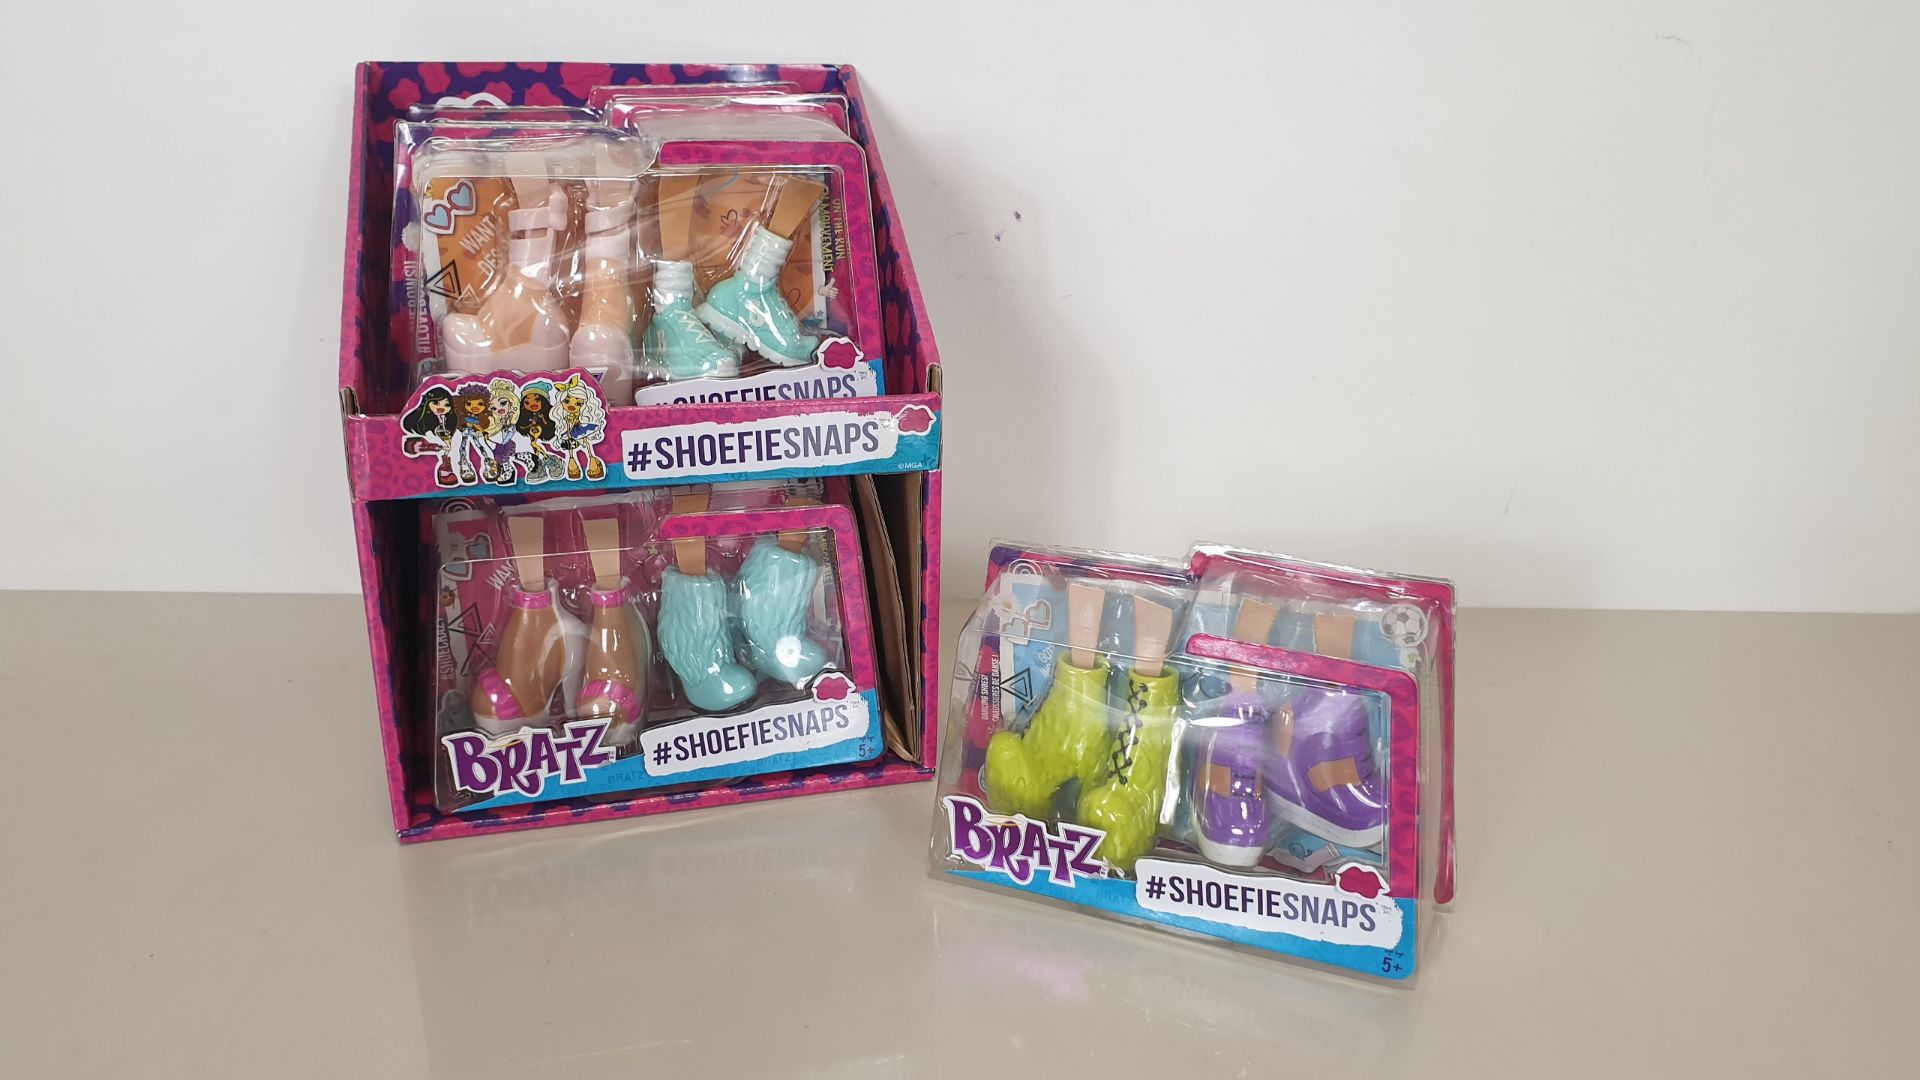 78 X BRAND NEW FASHION DOLLS BRATZ #SHOEFIESNAPS PACK ASST (12 SMALL DISPLAY BOXES)- IN 12 BOXES